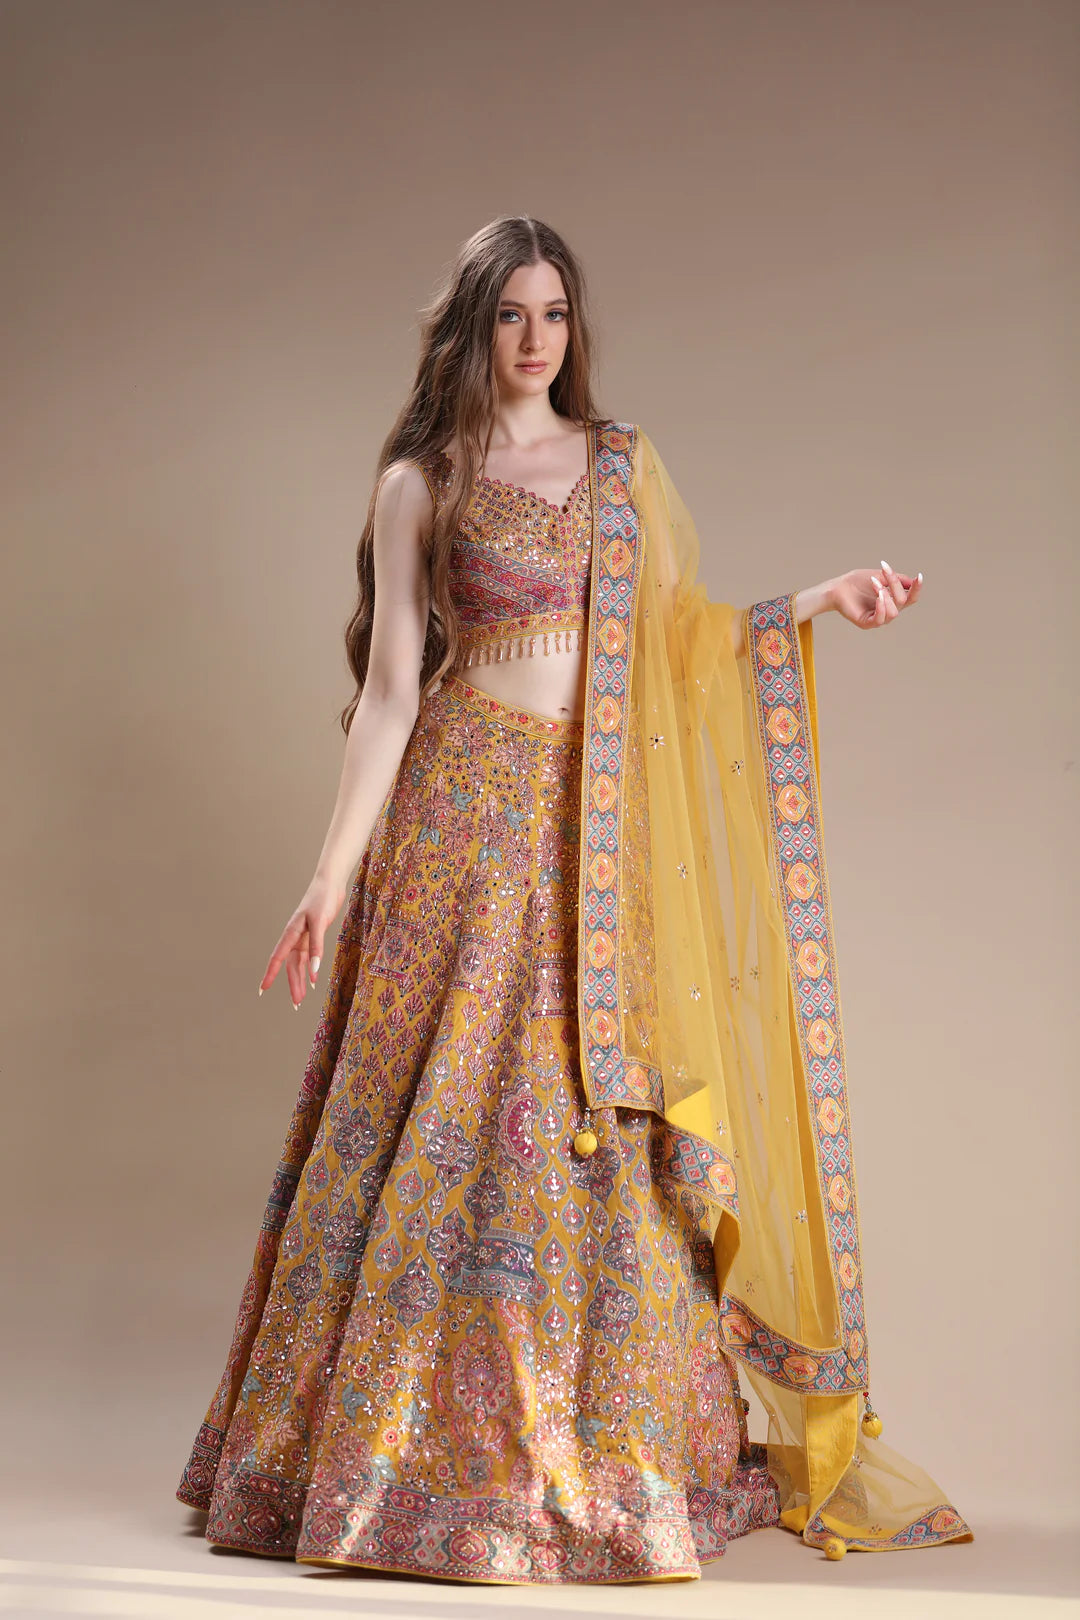 The ensemble worn by the model features a fashionable floral-patterned lehenga.